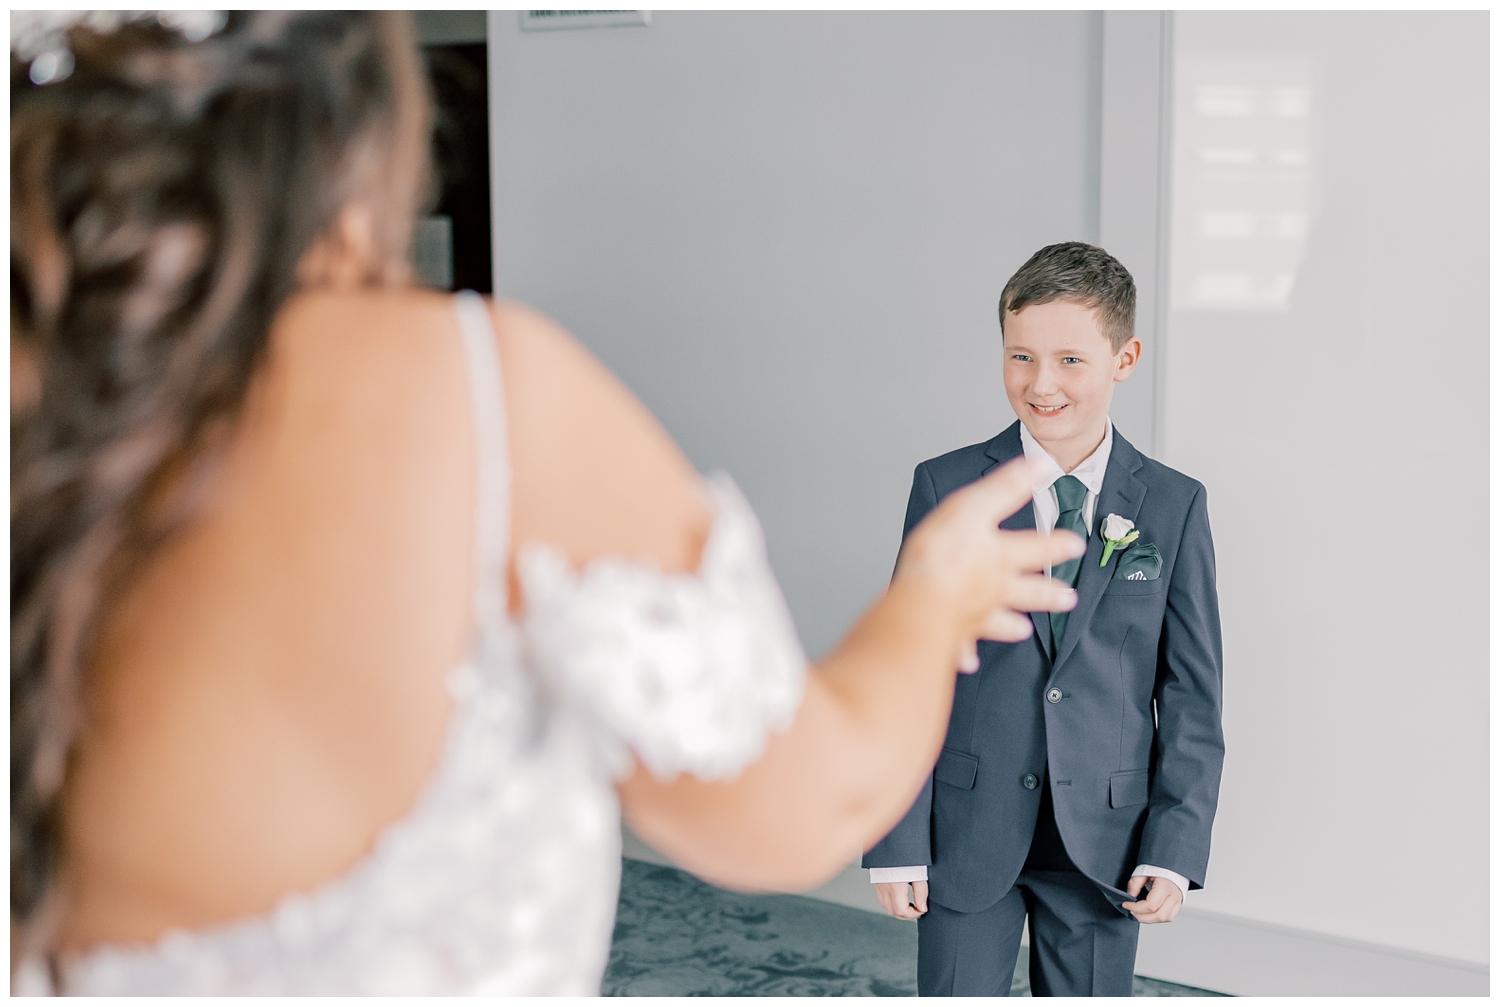 Bride sharing a first look with her son on her wedding day. The wedding was held at The State Room in Albany, NY.